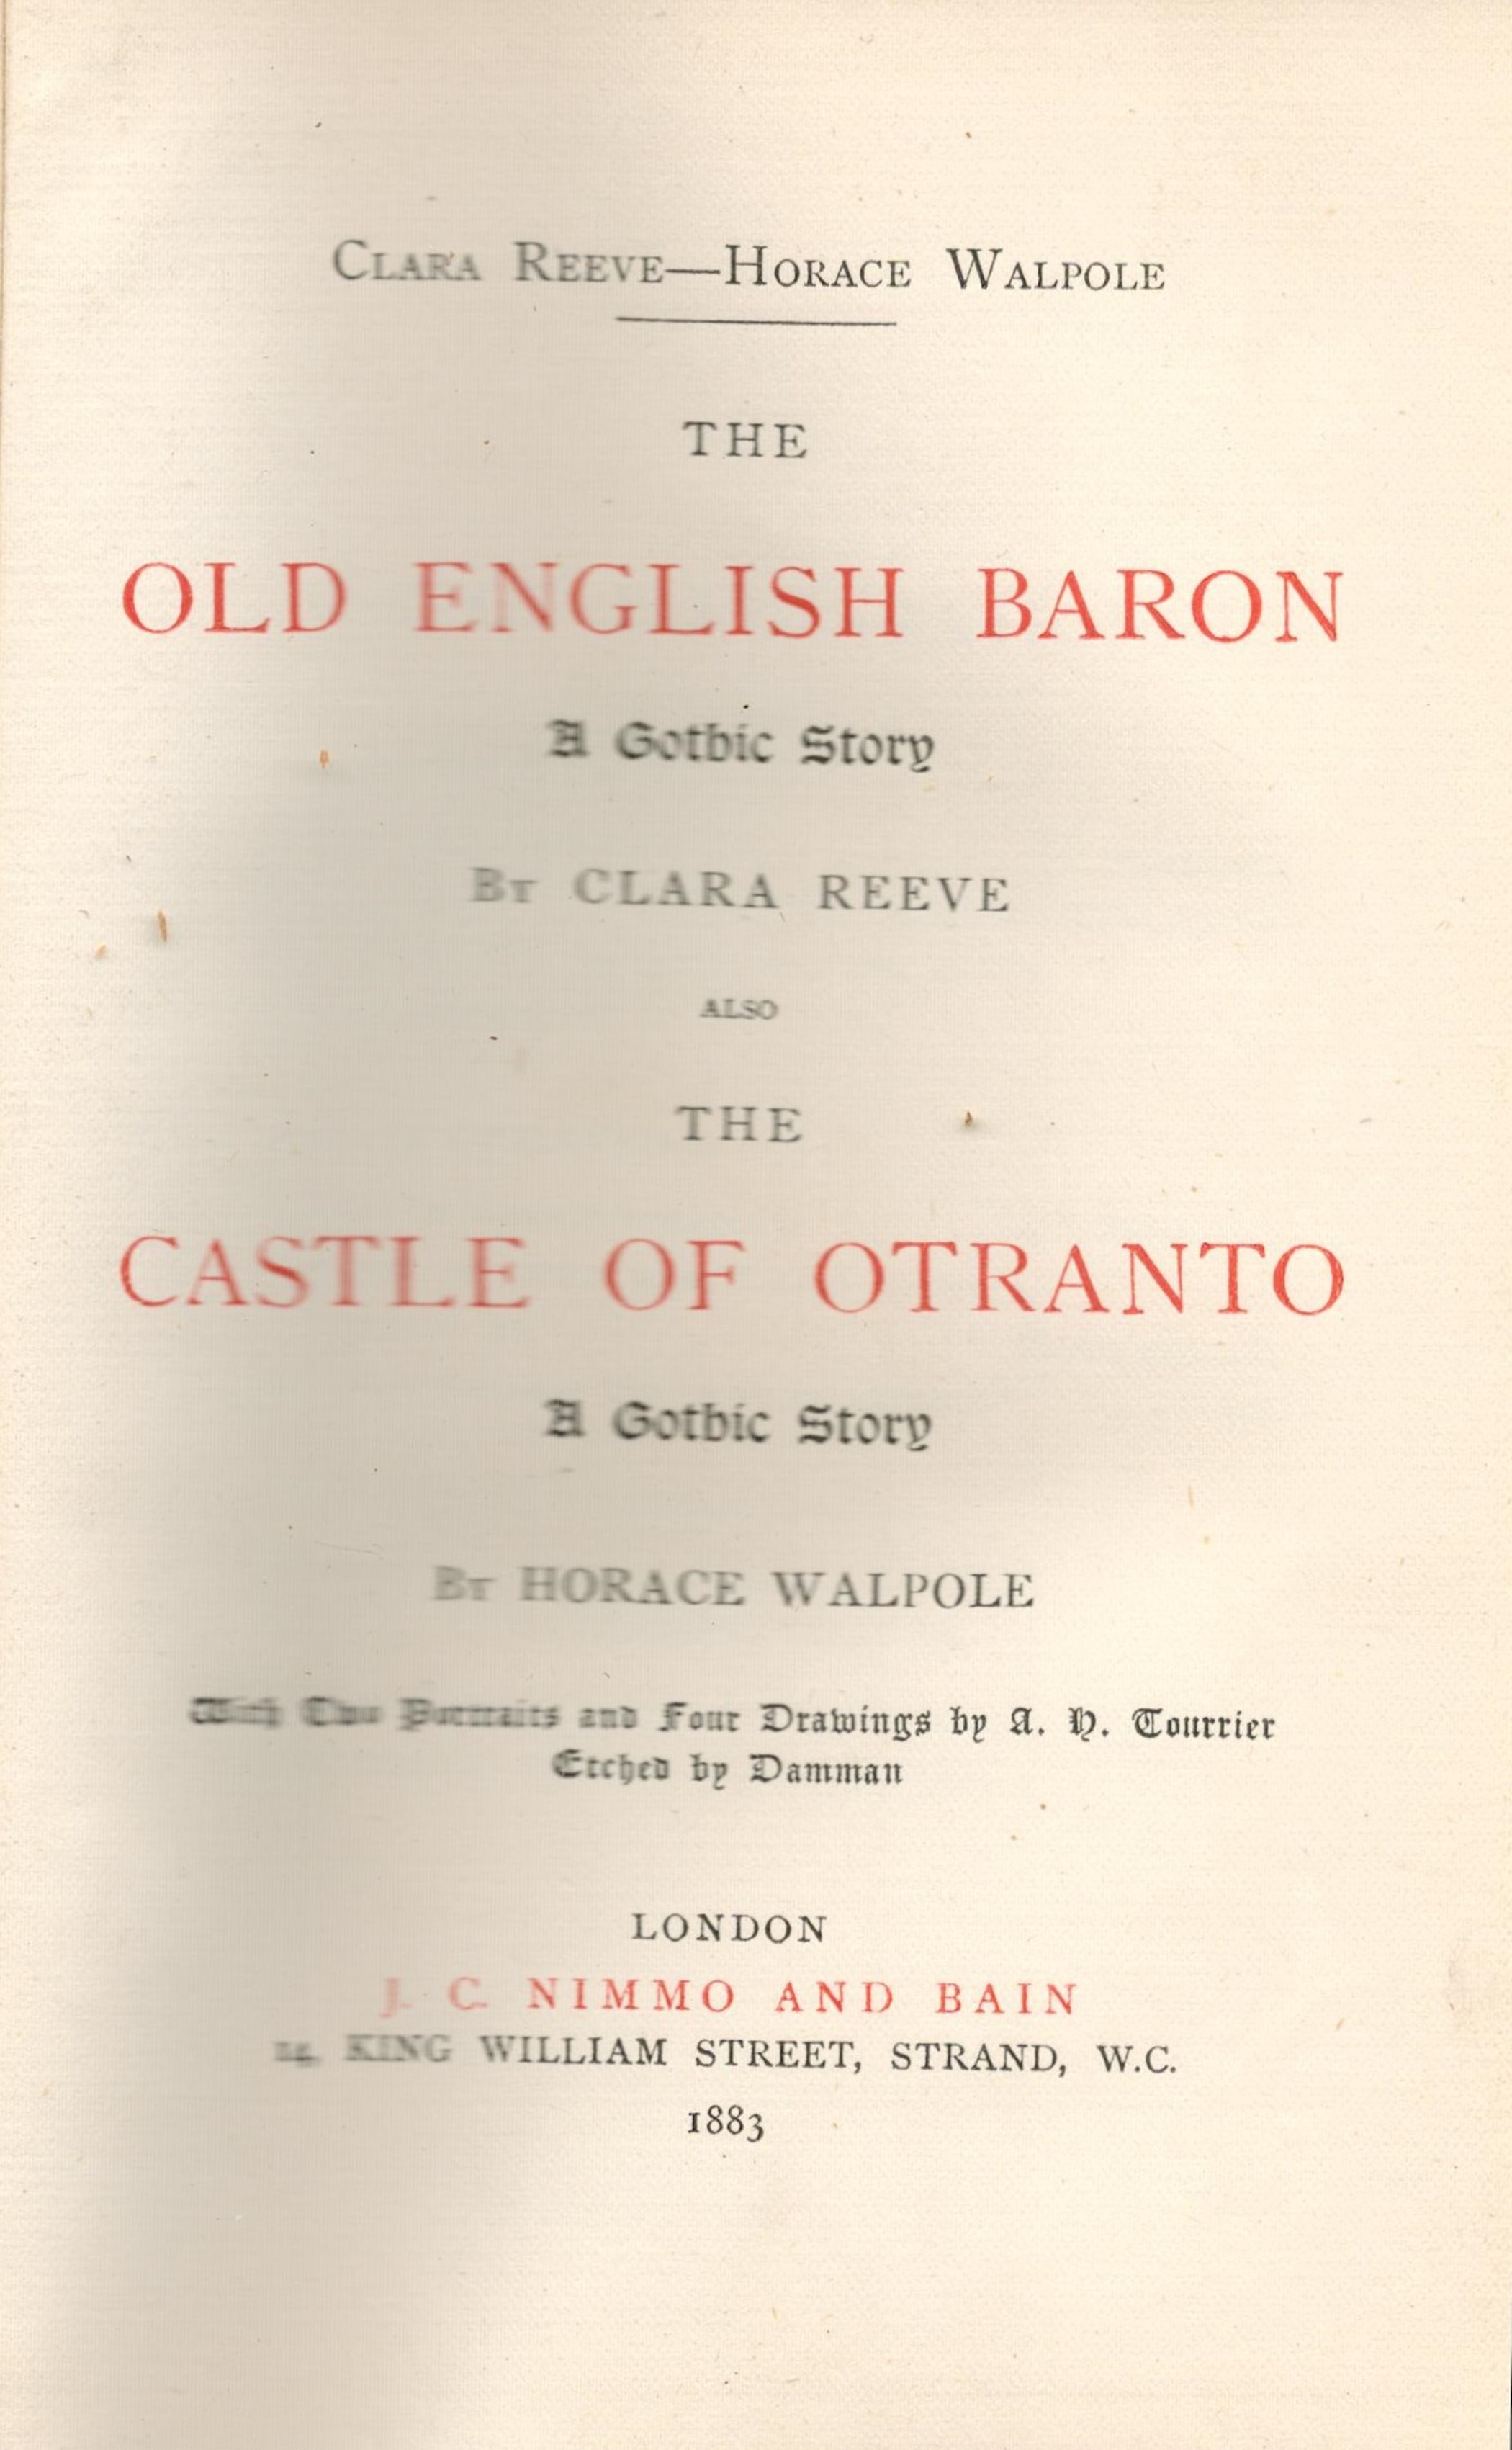 The Old English Baron and The Castle of Otranto Gothic Stories by Horace Walpole Hardback Book - Image 2 of 4